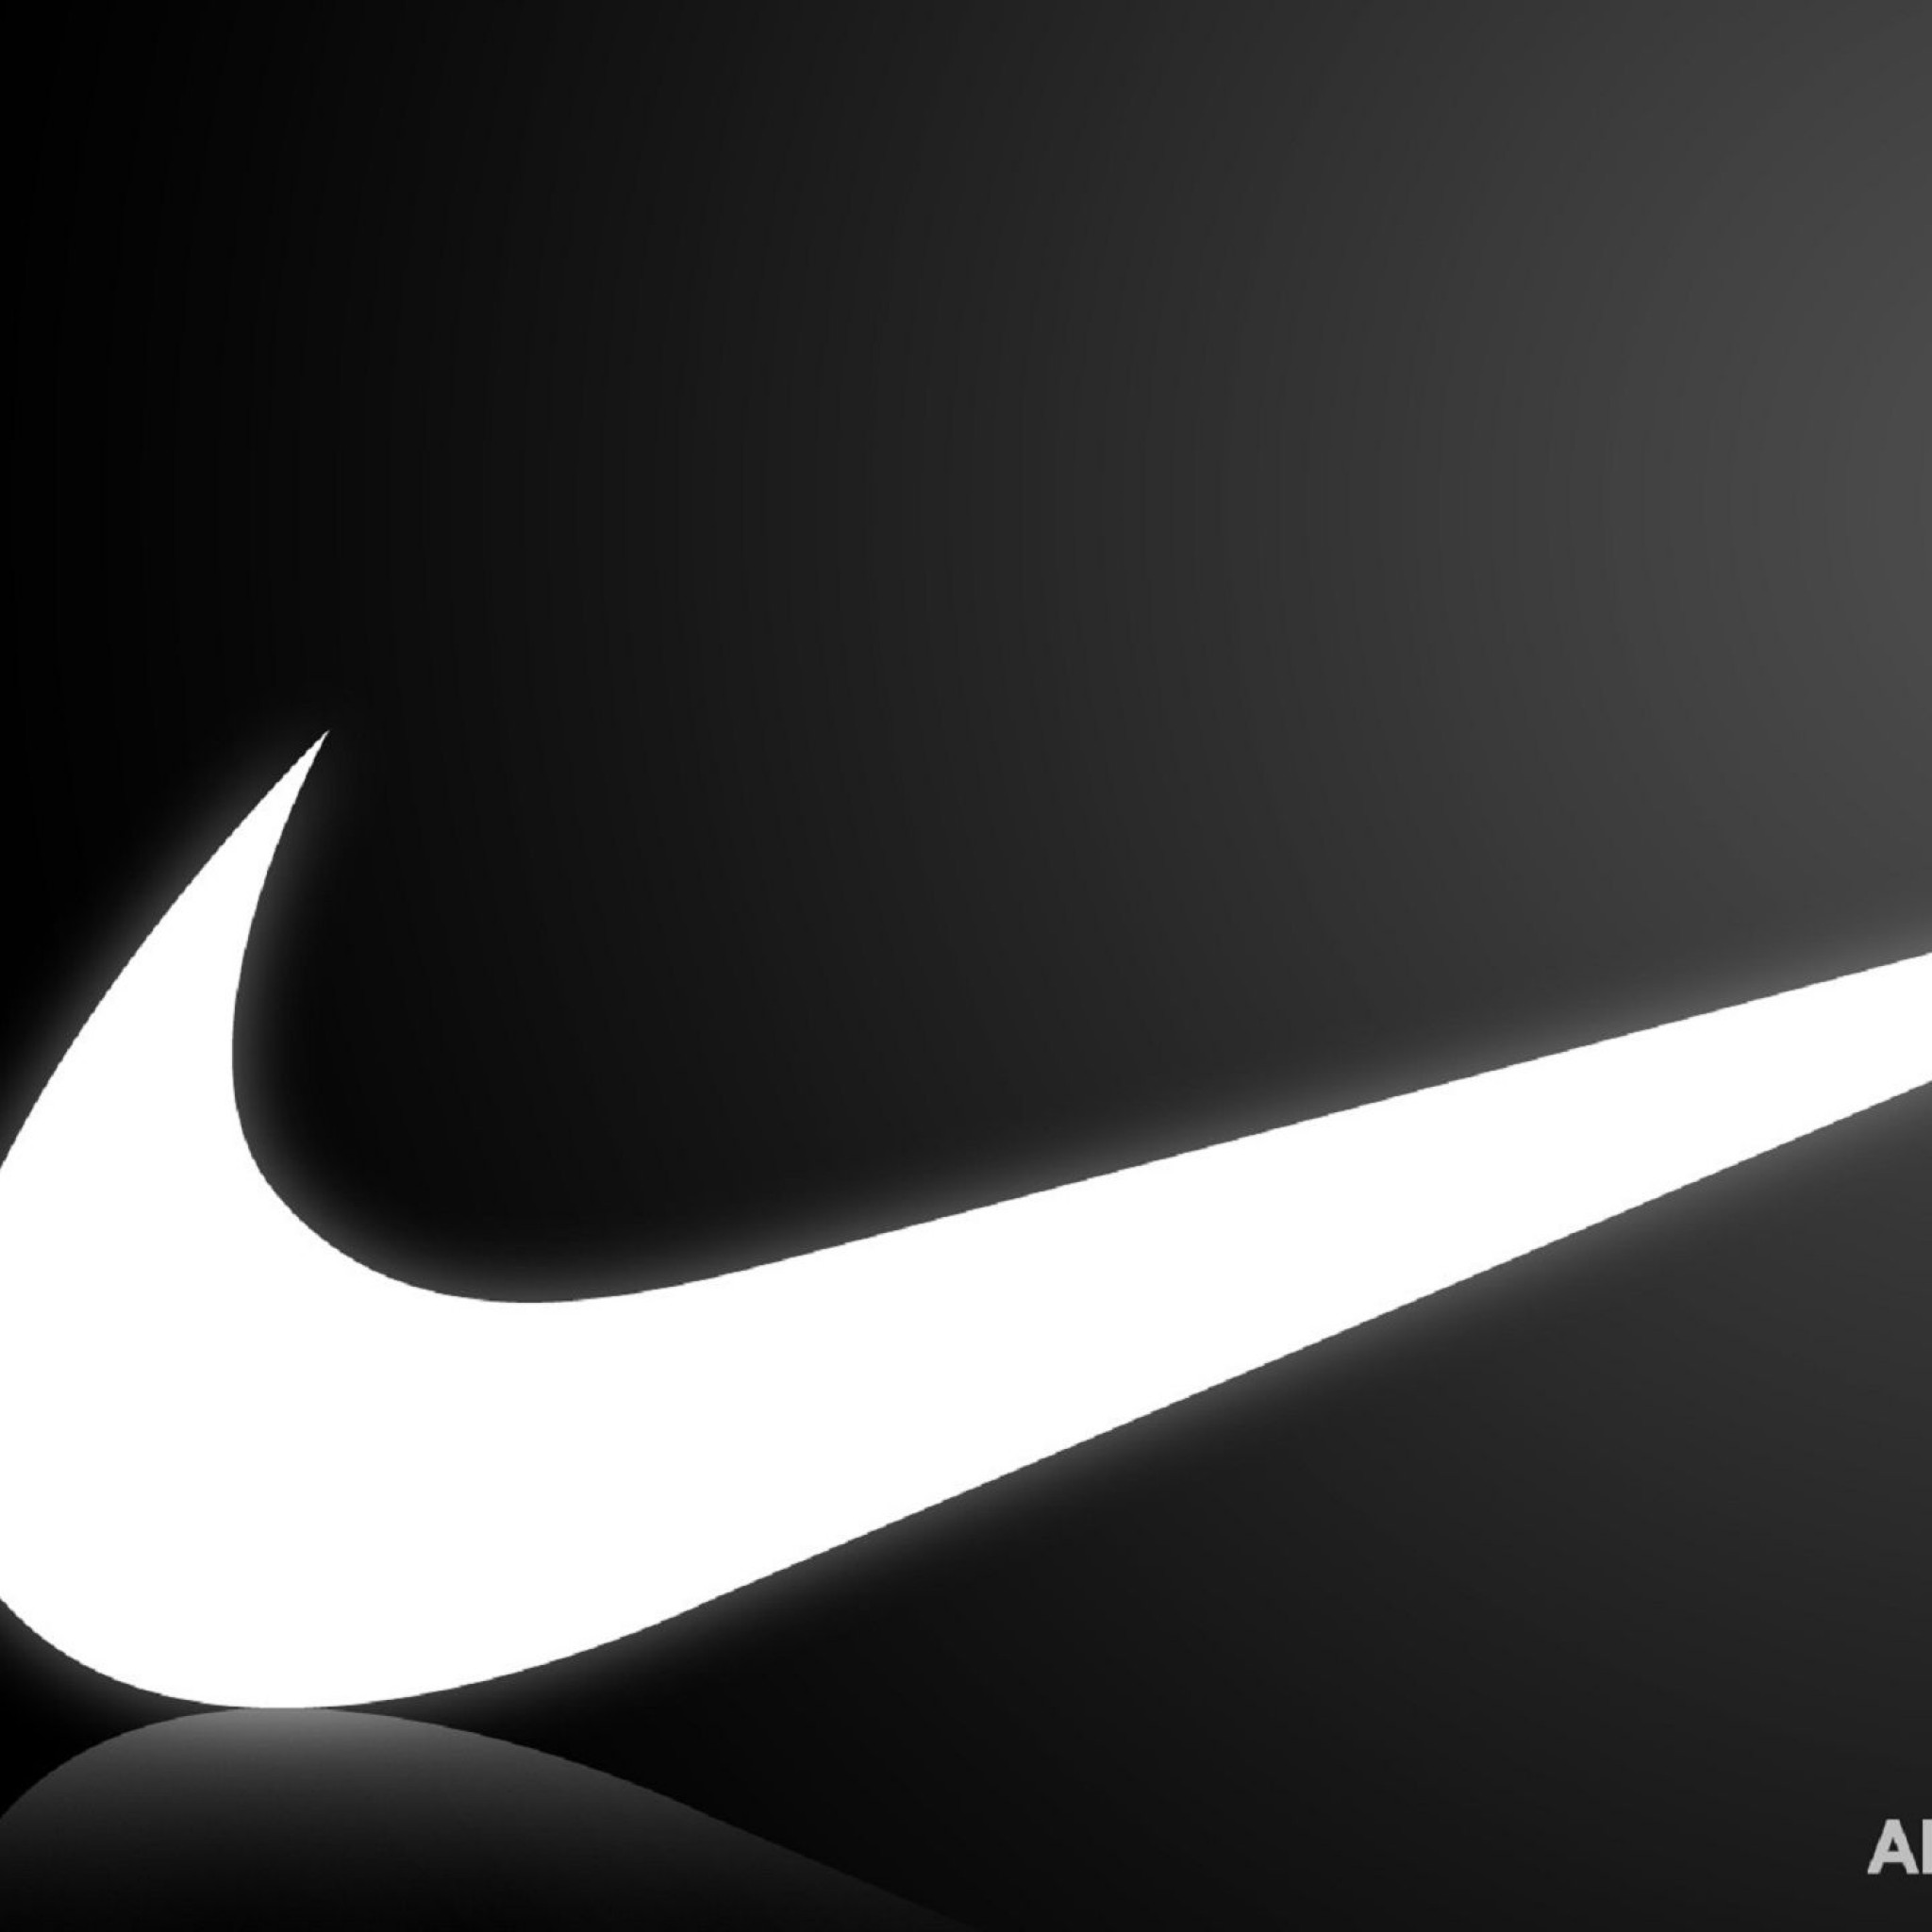 Free Download Nike Iphone Wallpapers Ipad Wallpaper Gallery 48x48 For Your Desktop Mobile Tablet Explore 49 Nike Iphone 6 Wallpaper Nike Sb Wallpapers White Nike Wallpaper Nike Money Wallpaper